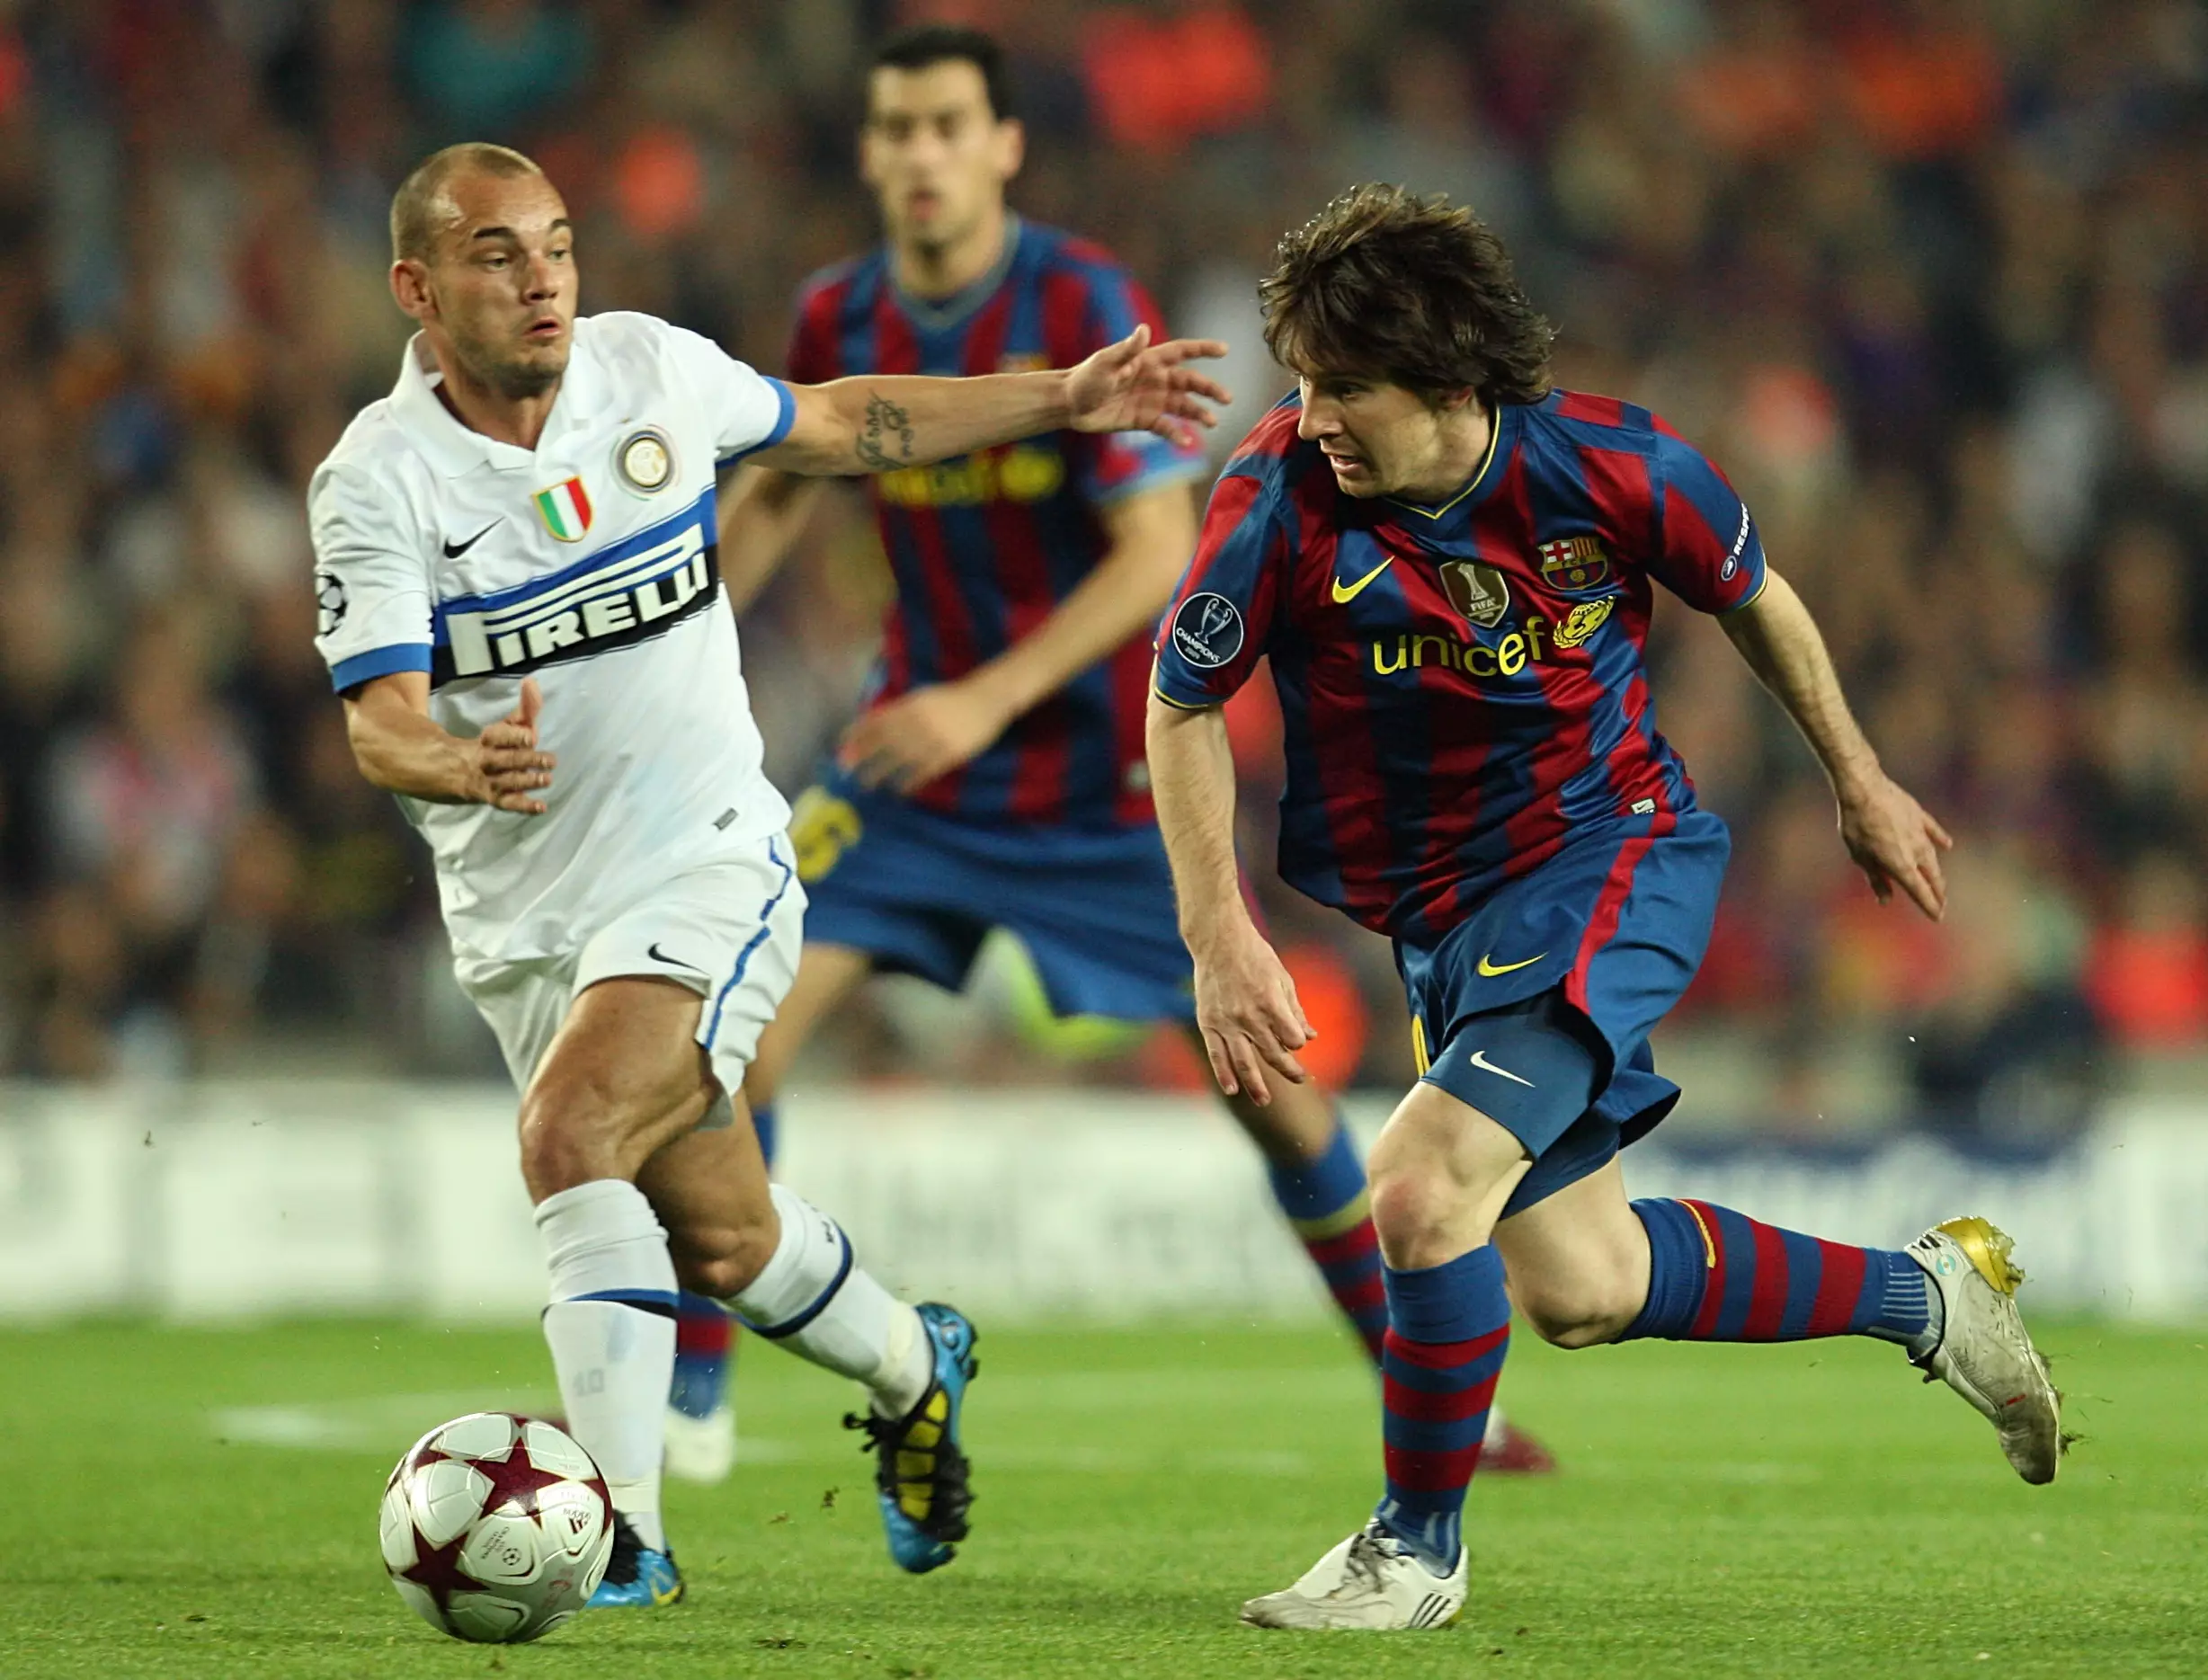 Sneijder faced Messi in the Champions League semi-final in 2010. Image: PA Images